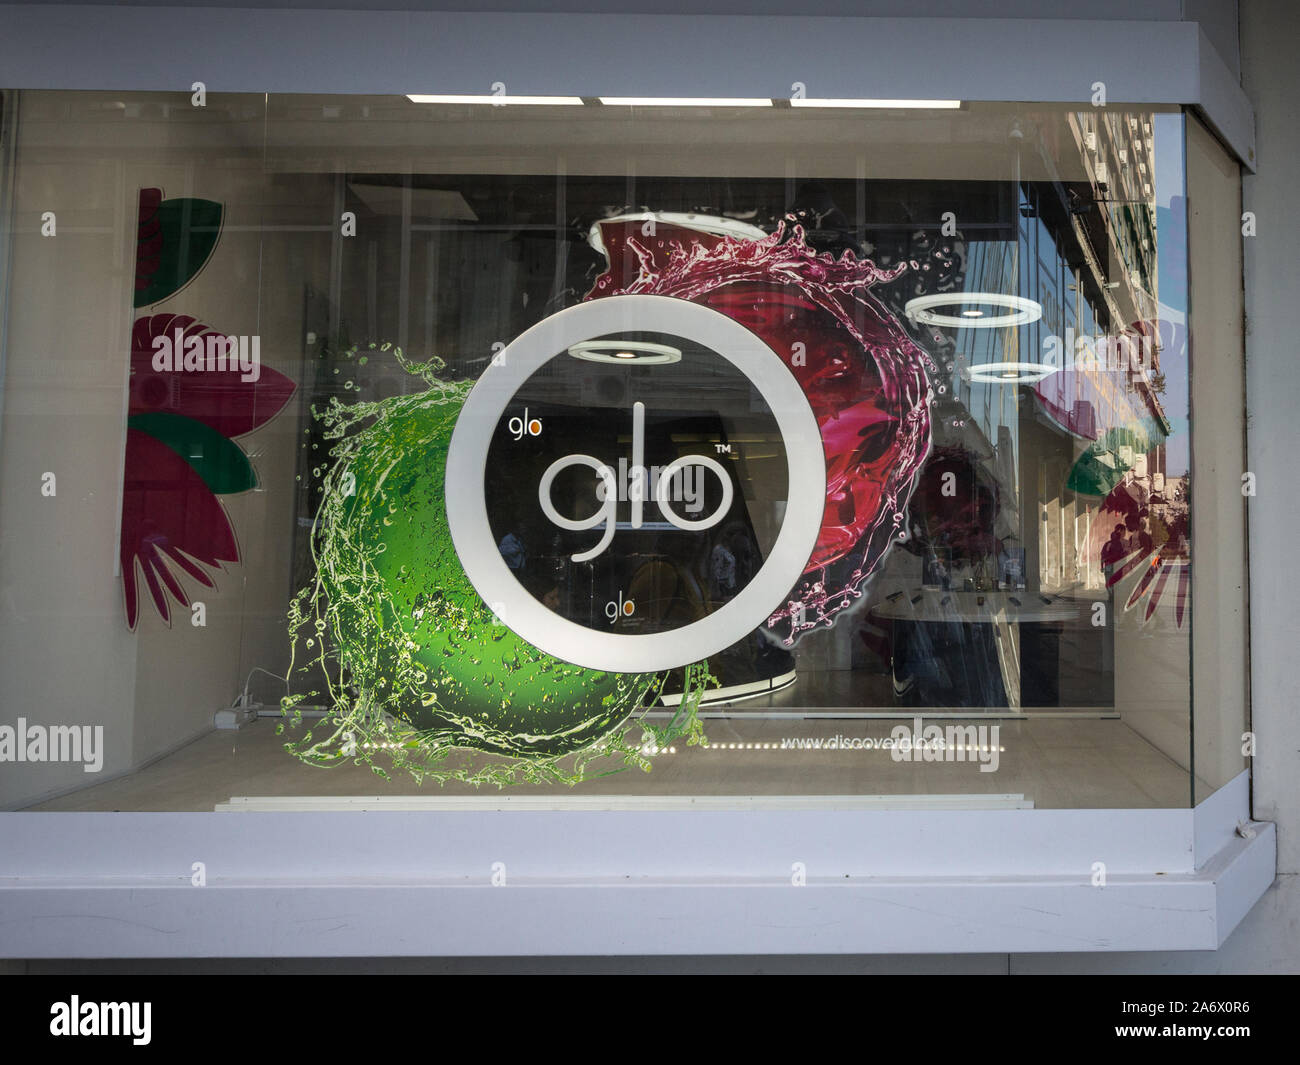 BELGRADE, SERBIA - JULY 6, 2019: Glo logo in front of a local shop in Serbia. Glo, beloning to British American Tobacco is a tobacco heating cigarette Stock Photo